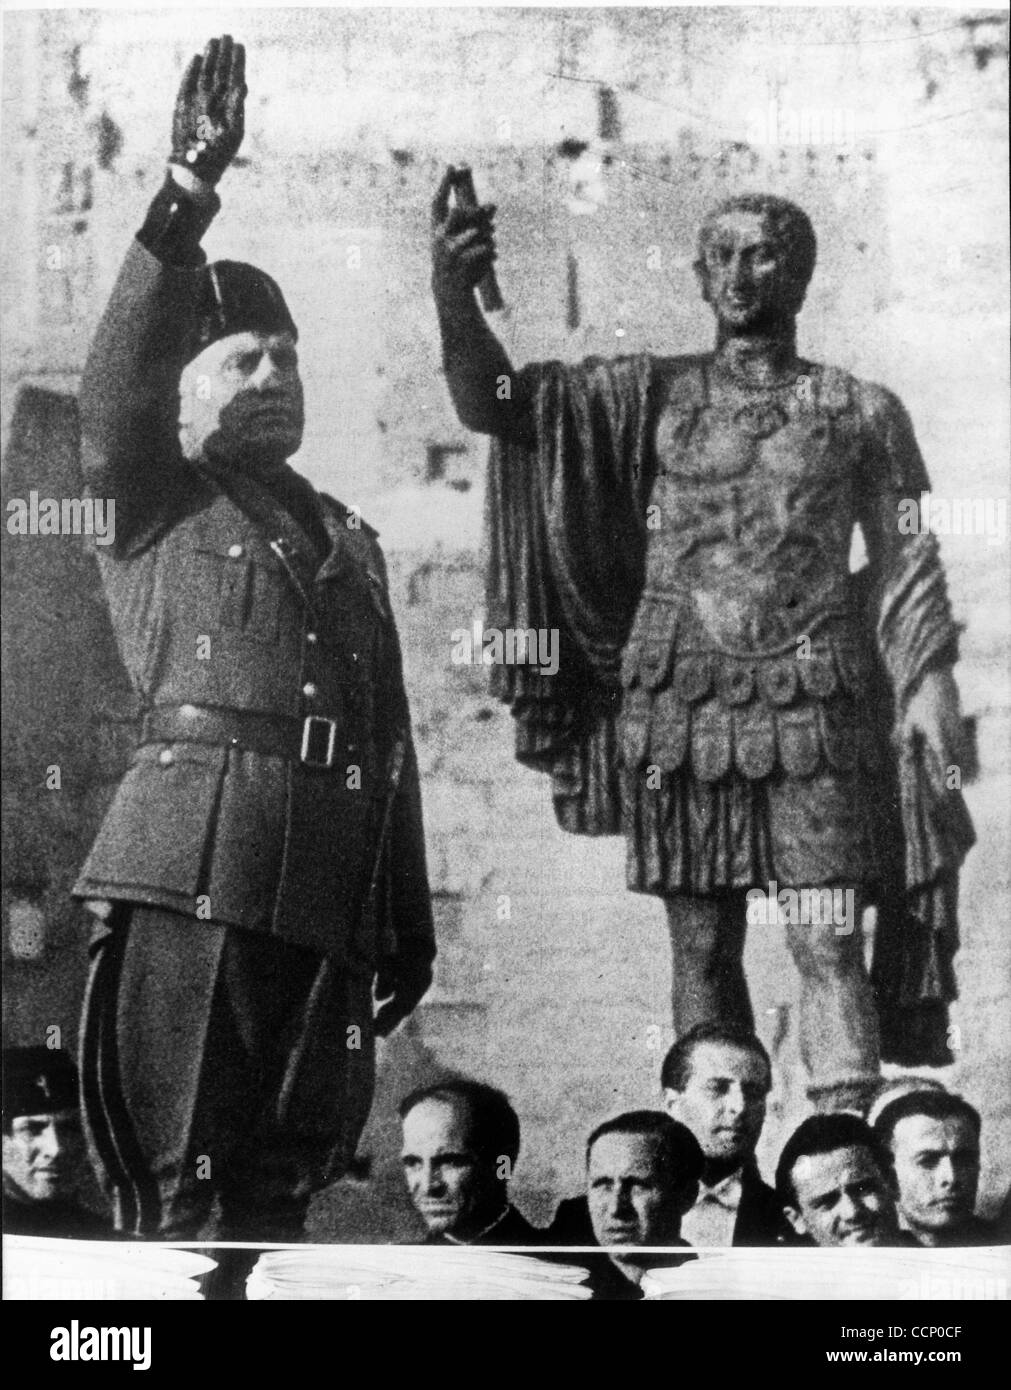 Dec. 16, 1940 - Rome, Italy - BENITO MUSSOLINI (1883-1945) the Italian dictator and leader of the Fascist movement. PICTURED: Mussolini acknowledging the crowd.  (Credit Image: © KEYSTONE Pictures USA/ZUMAPRESS.com) Stock Photo